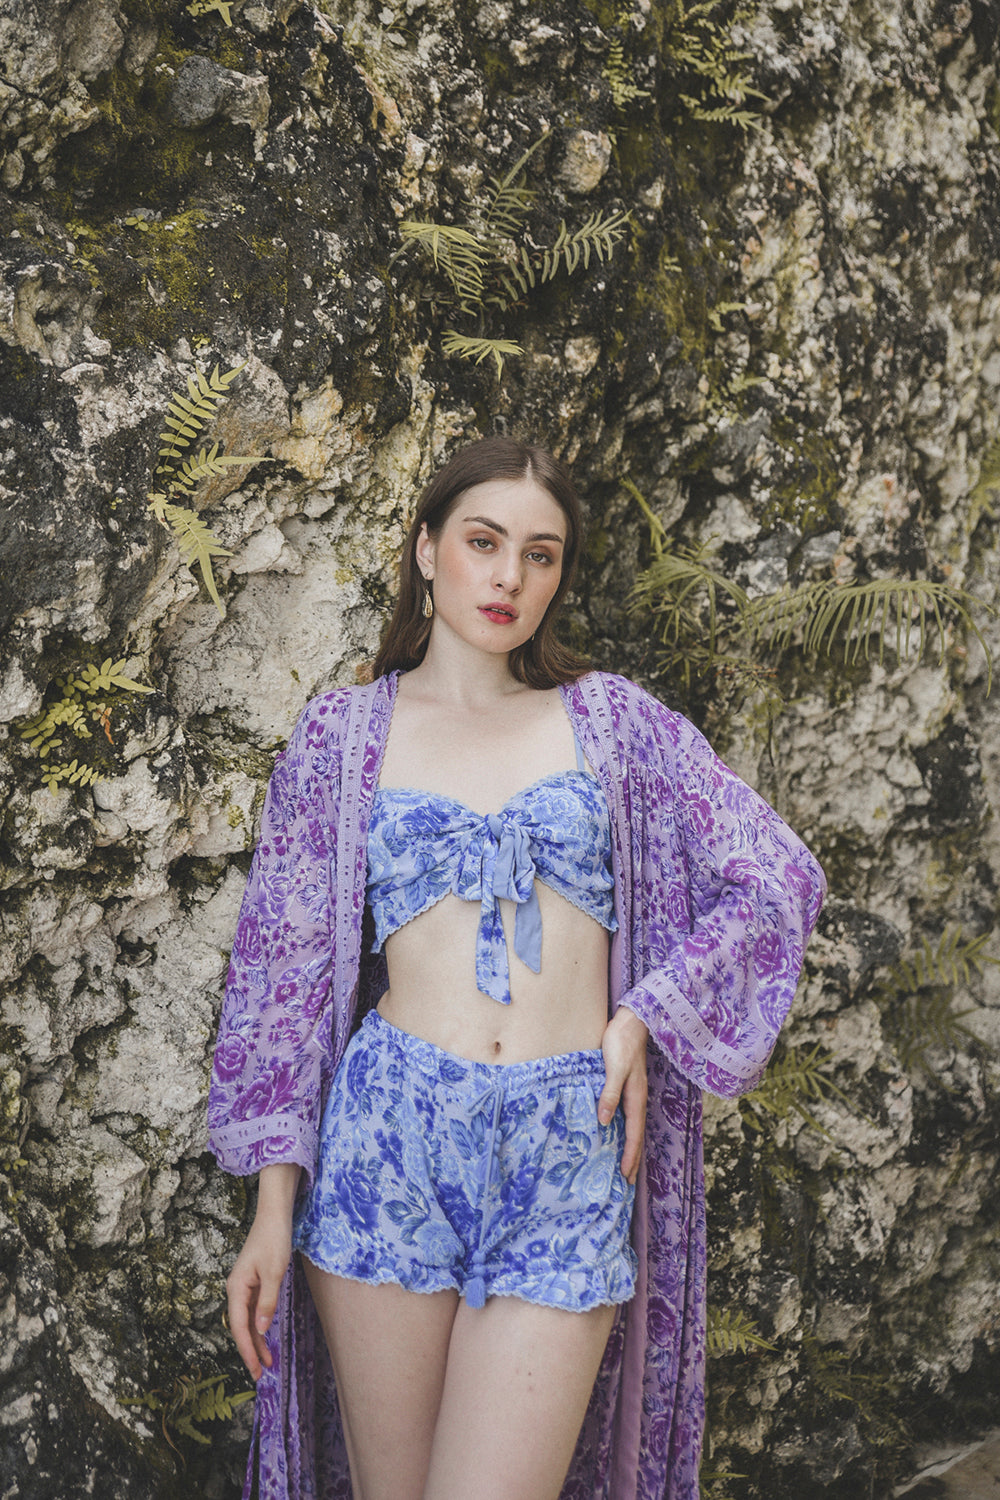 Dive into relaxation with the Peony Long Robe, a modern boho kimono from Tulle and Batiste's Peony collection, handmade by Balinese artisans with ethical care